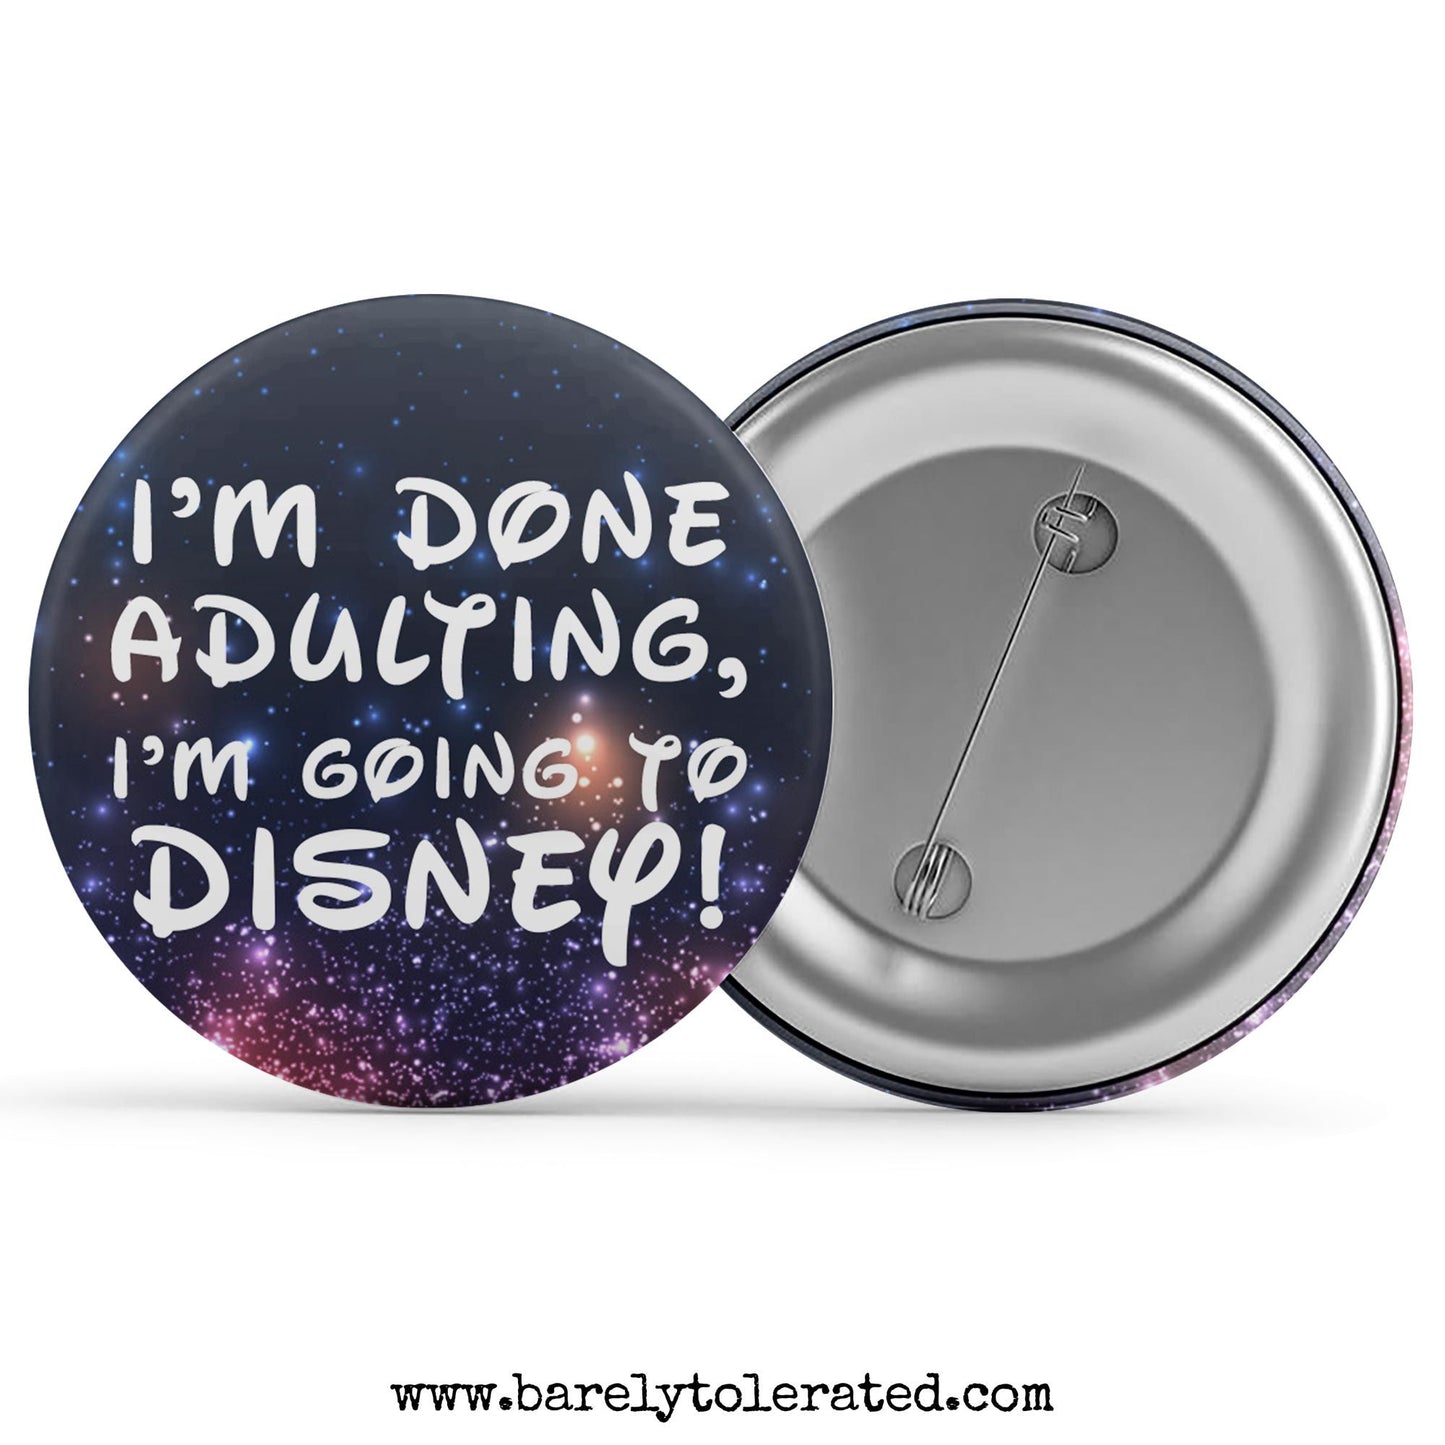 I'm Done Adulting, I'm Going To Disney!